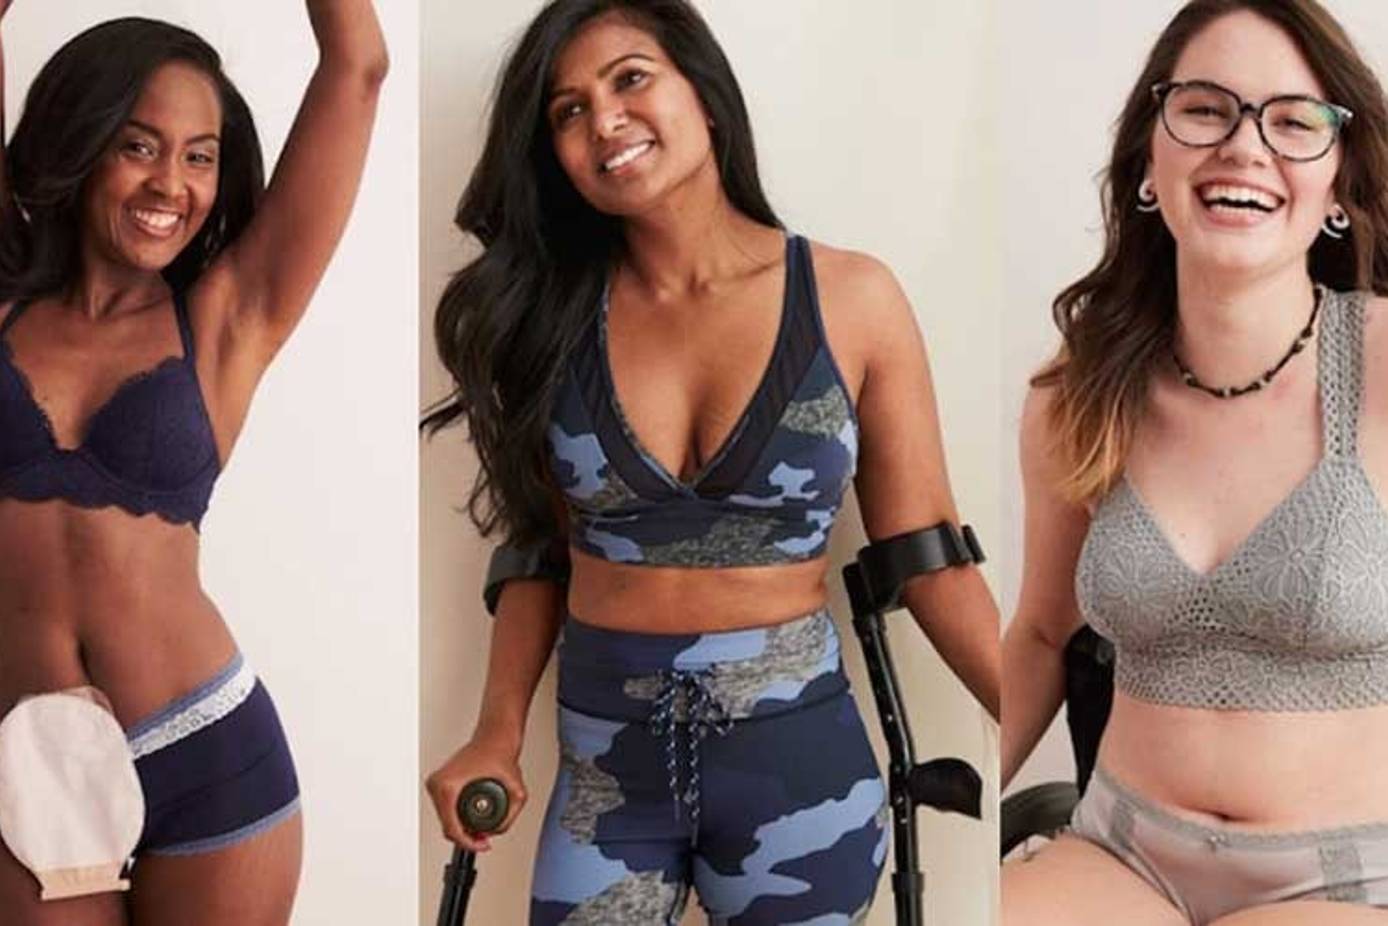 Aerie bras make you feel real good! - #AerieREAL Life